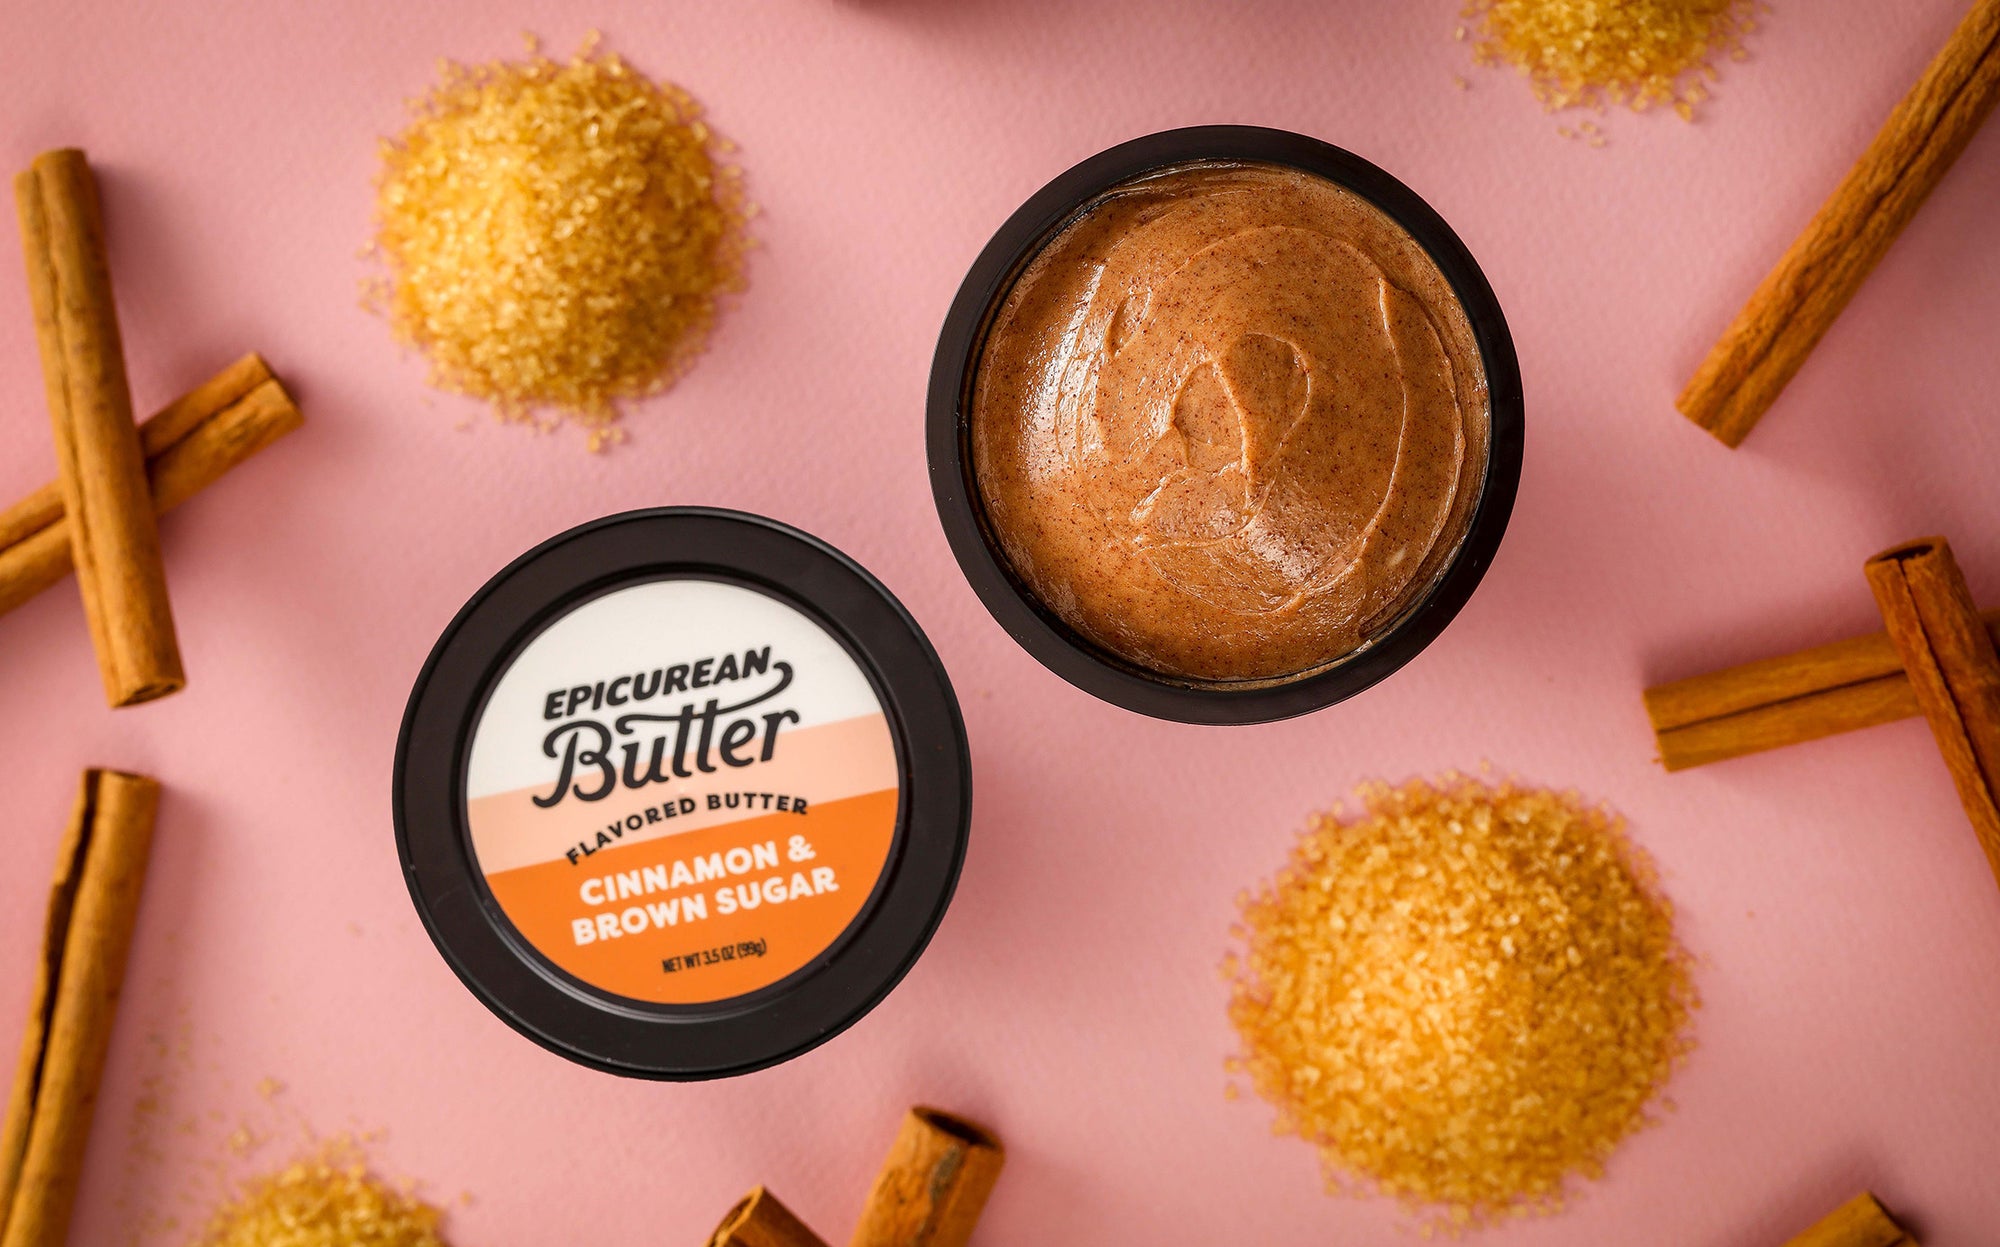 Epicurean Butter Cinnamon & Brown Sugar Flavored Butter with ingredients